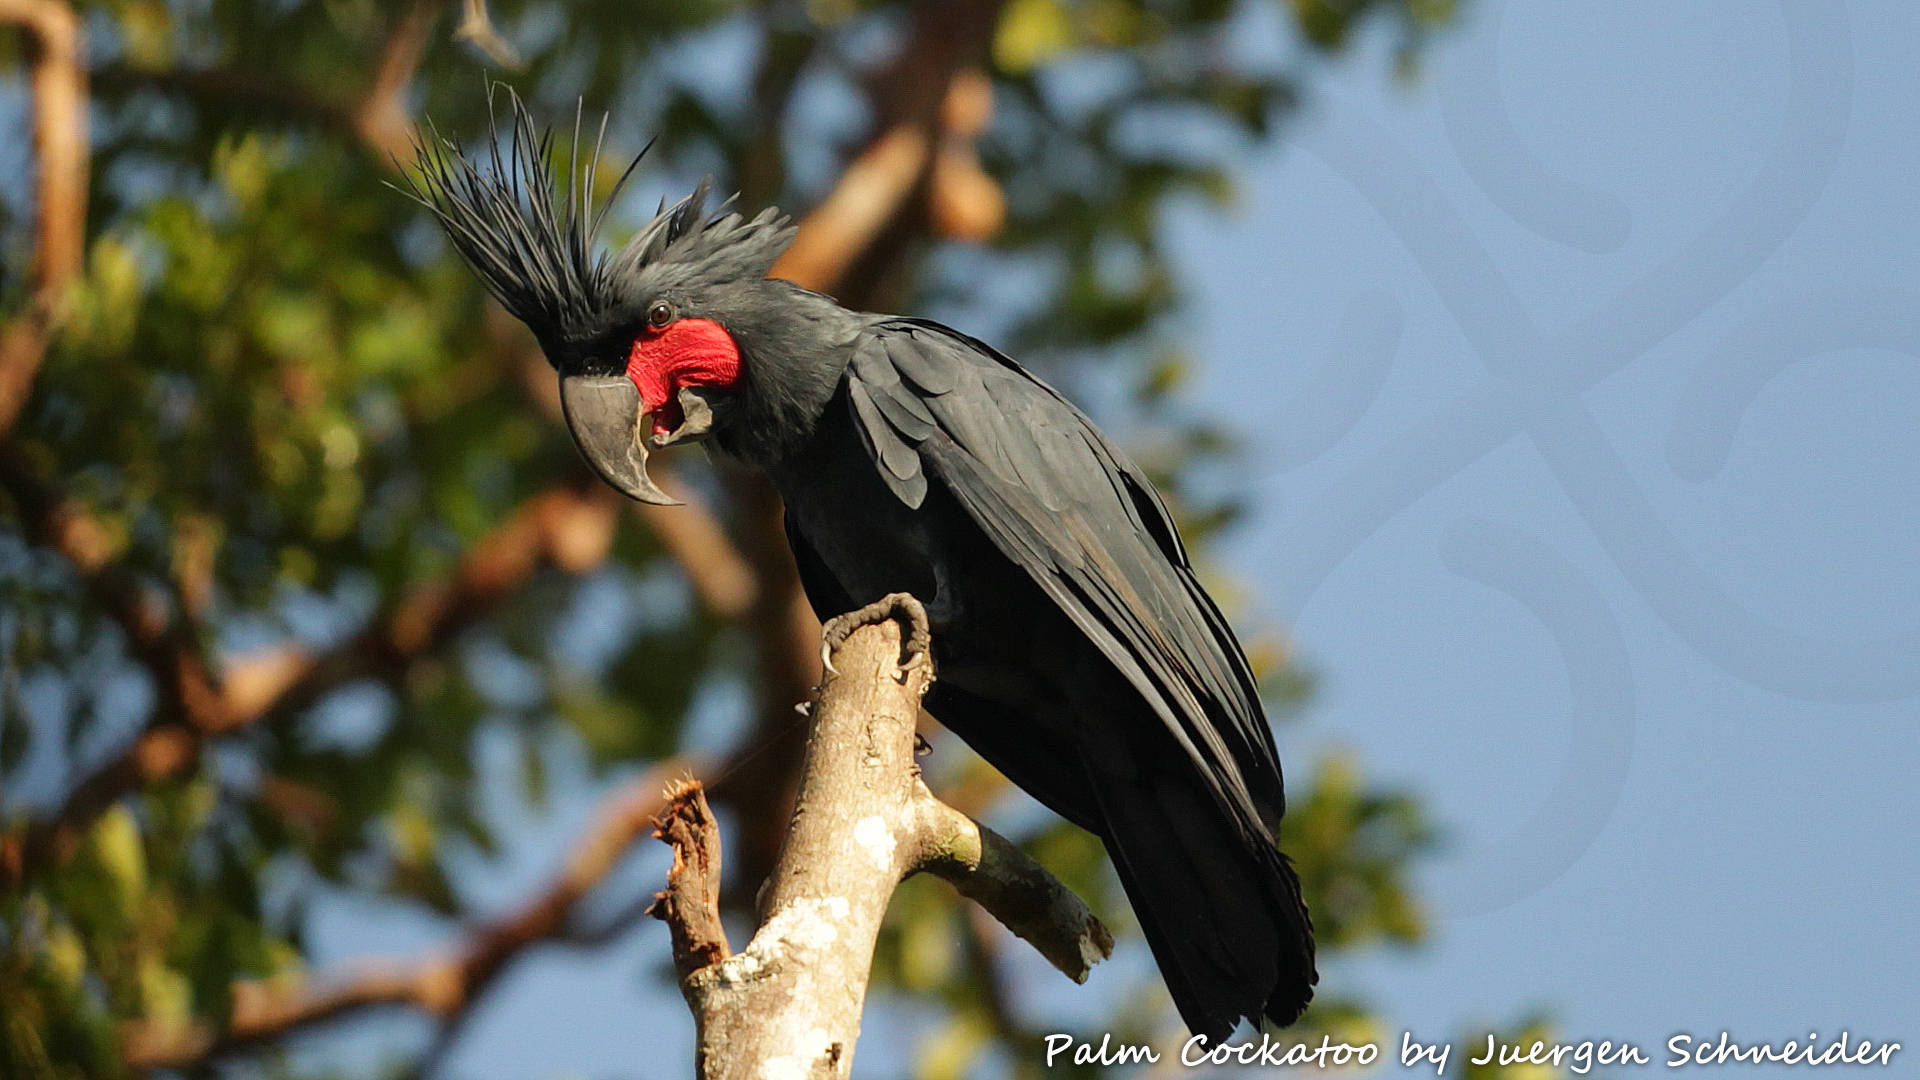 Even without erecting its wacko crest, the lowland-dwelling Palm Cockatoo Probosciger aterrimus stands out as New Guinea's biggest parrot and a veritable feast for the eyes. Copyright © Juergen Schneider